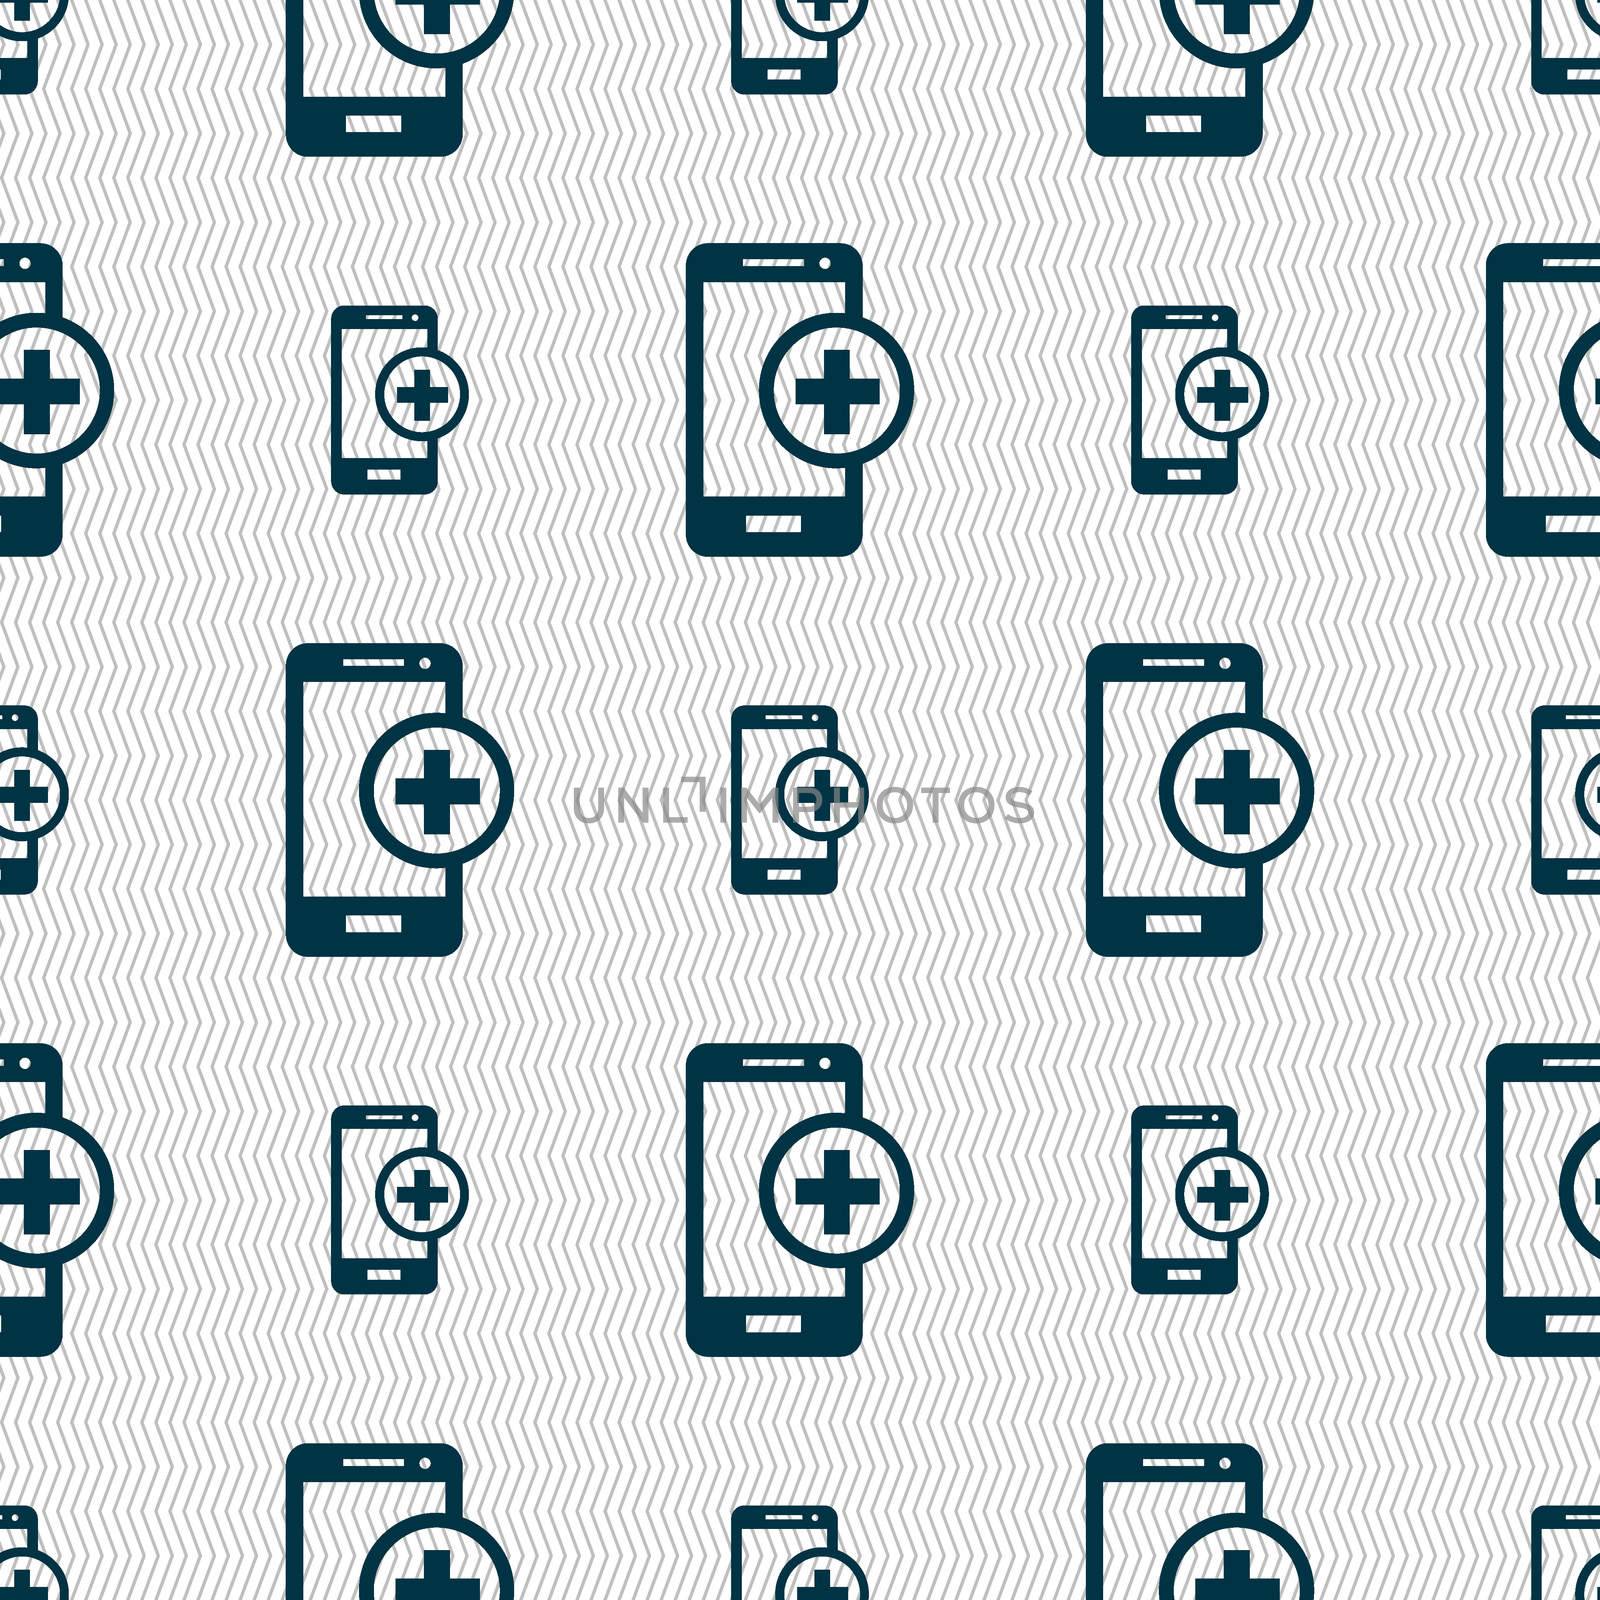 Mobile devices sign icon. with symbol plus. Seamless abstract background with geometric shapes. illustration